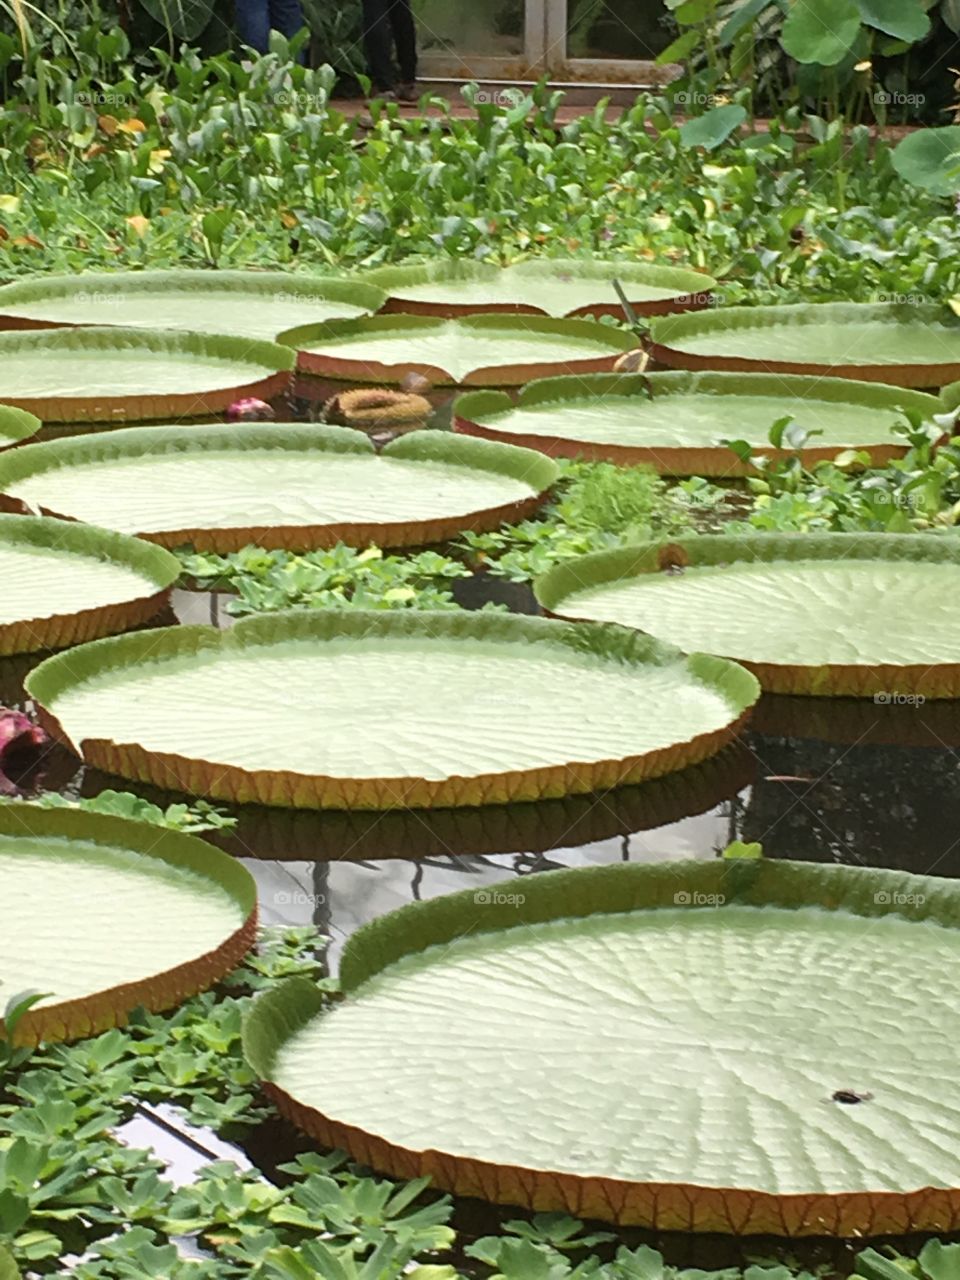 Giant lily pads